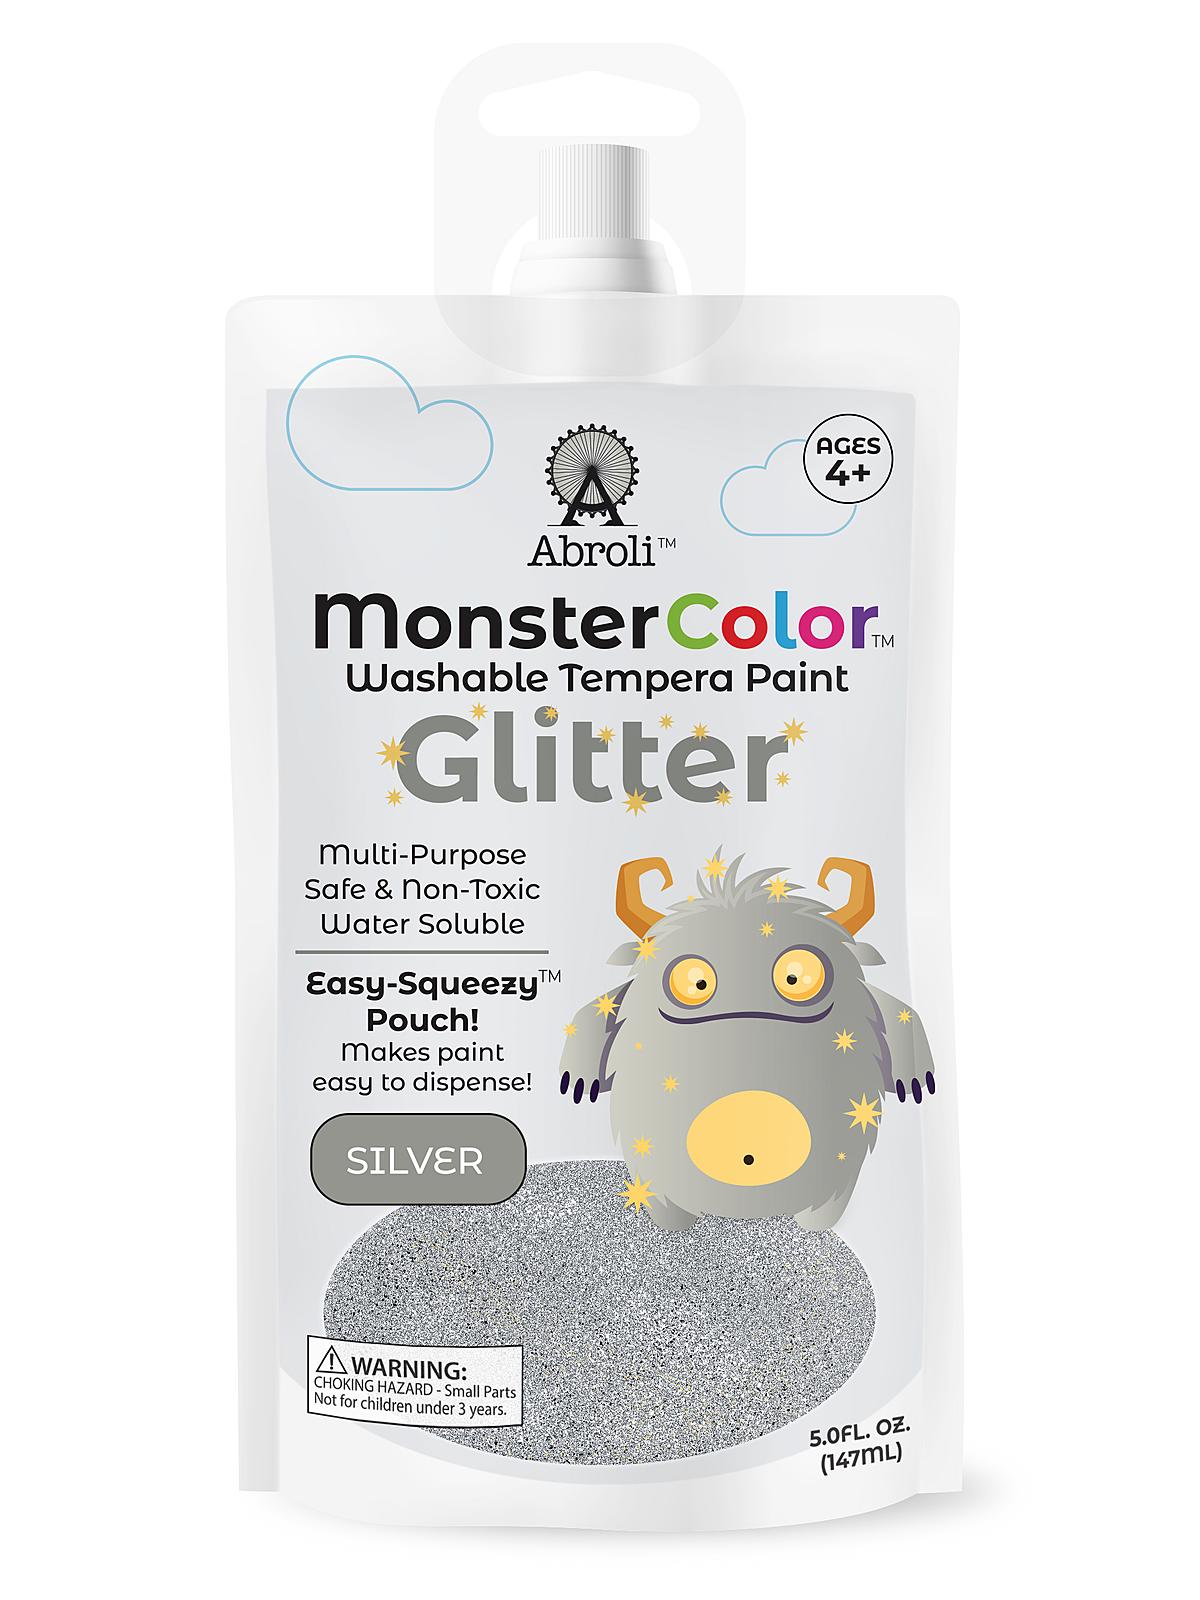 Monster Color Tempera Paint Glitter Silver 5 Oz. Pouch